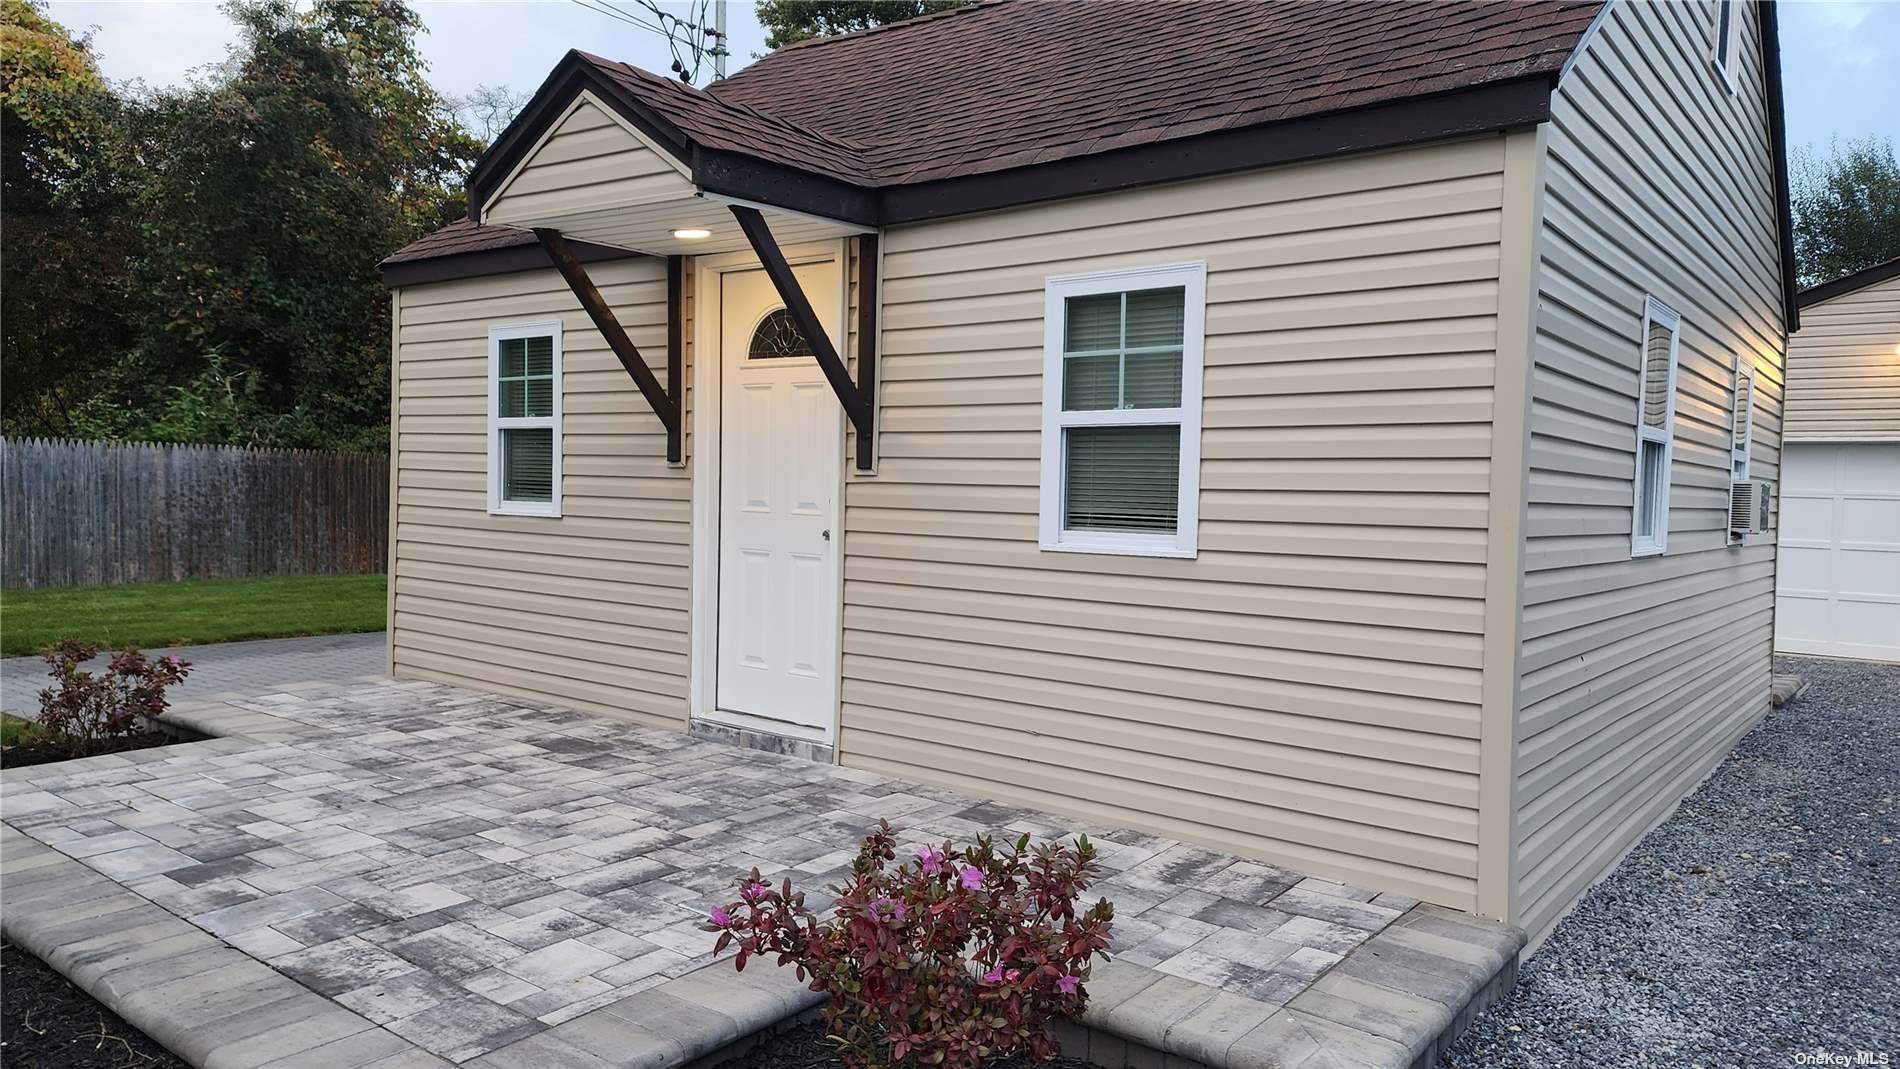 Low Taxes ! ! Recently Renovated and beautiful cozy 1 bedroom home with detached 2 car garage great for mechanic or storage garage features 220 electric too !